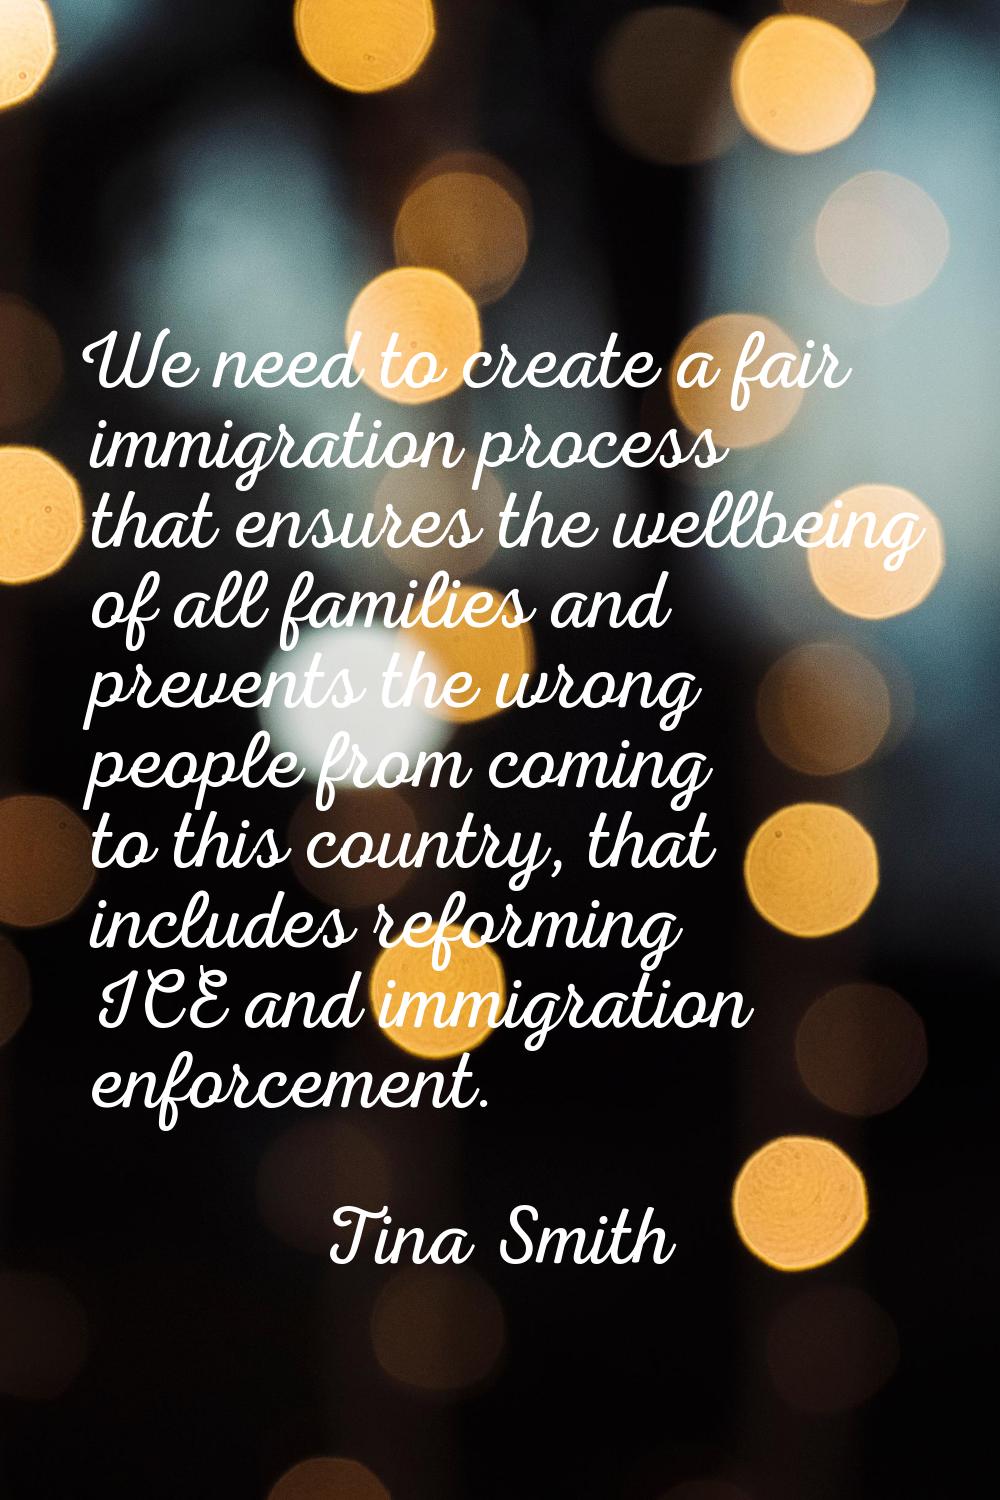 We need to create a fair immigration process that ensures the wellbeing of all families and prevent